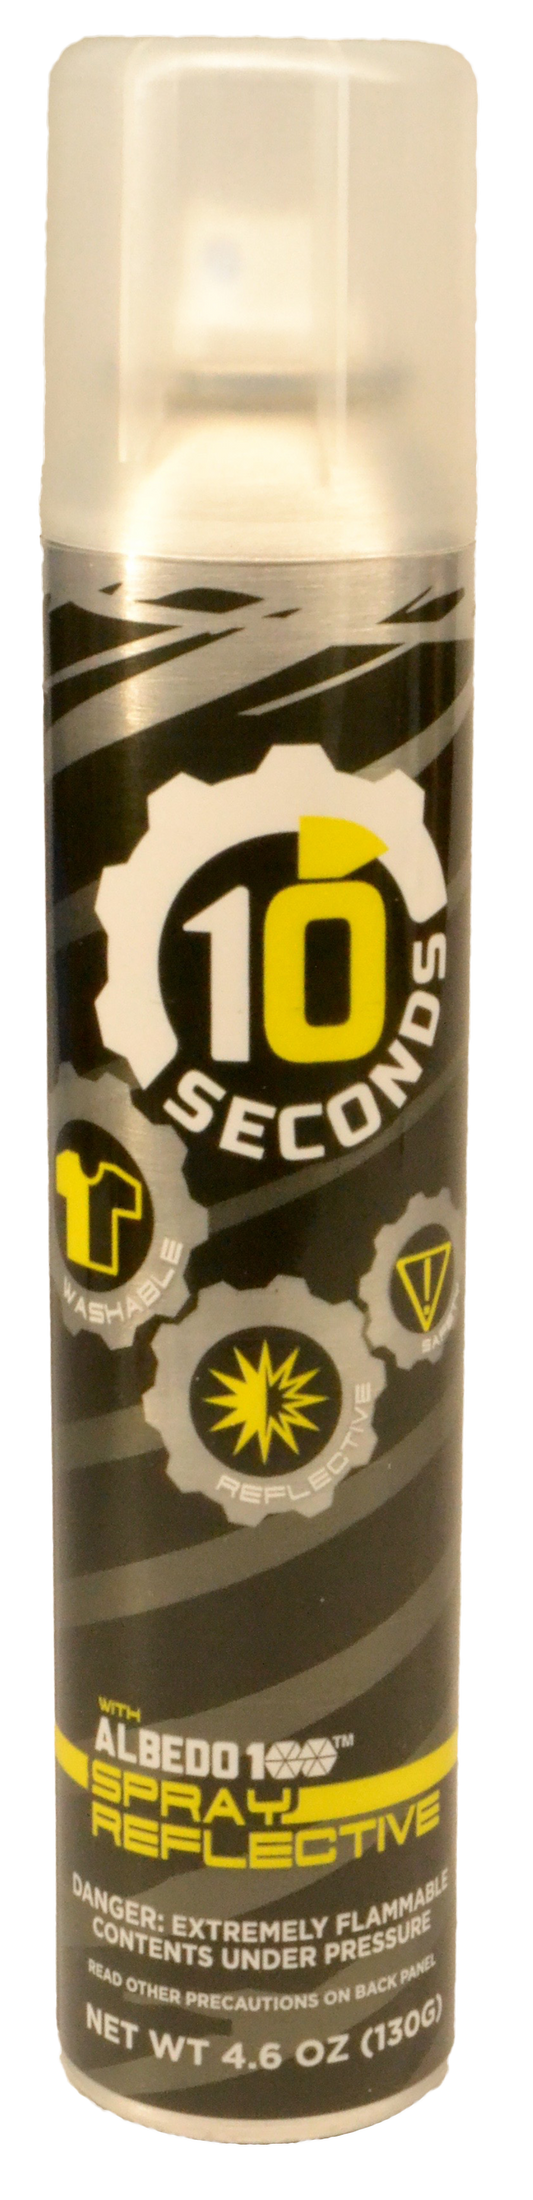 10 Seconds ® Washable Reflective Spray